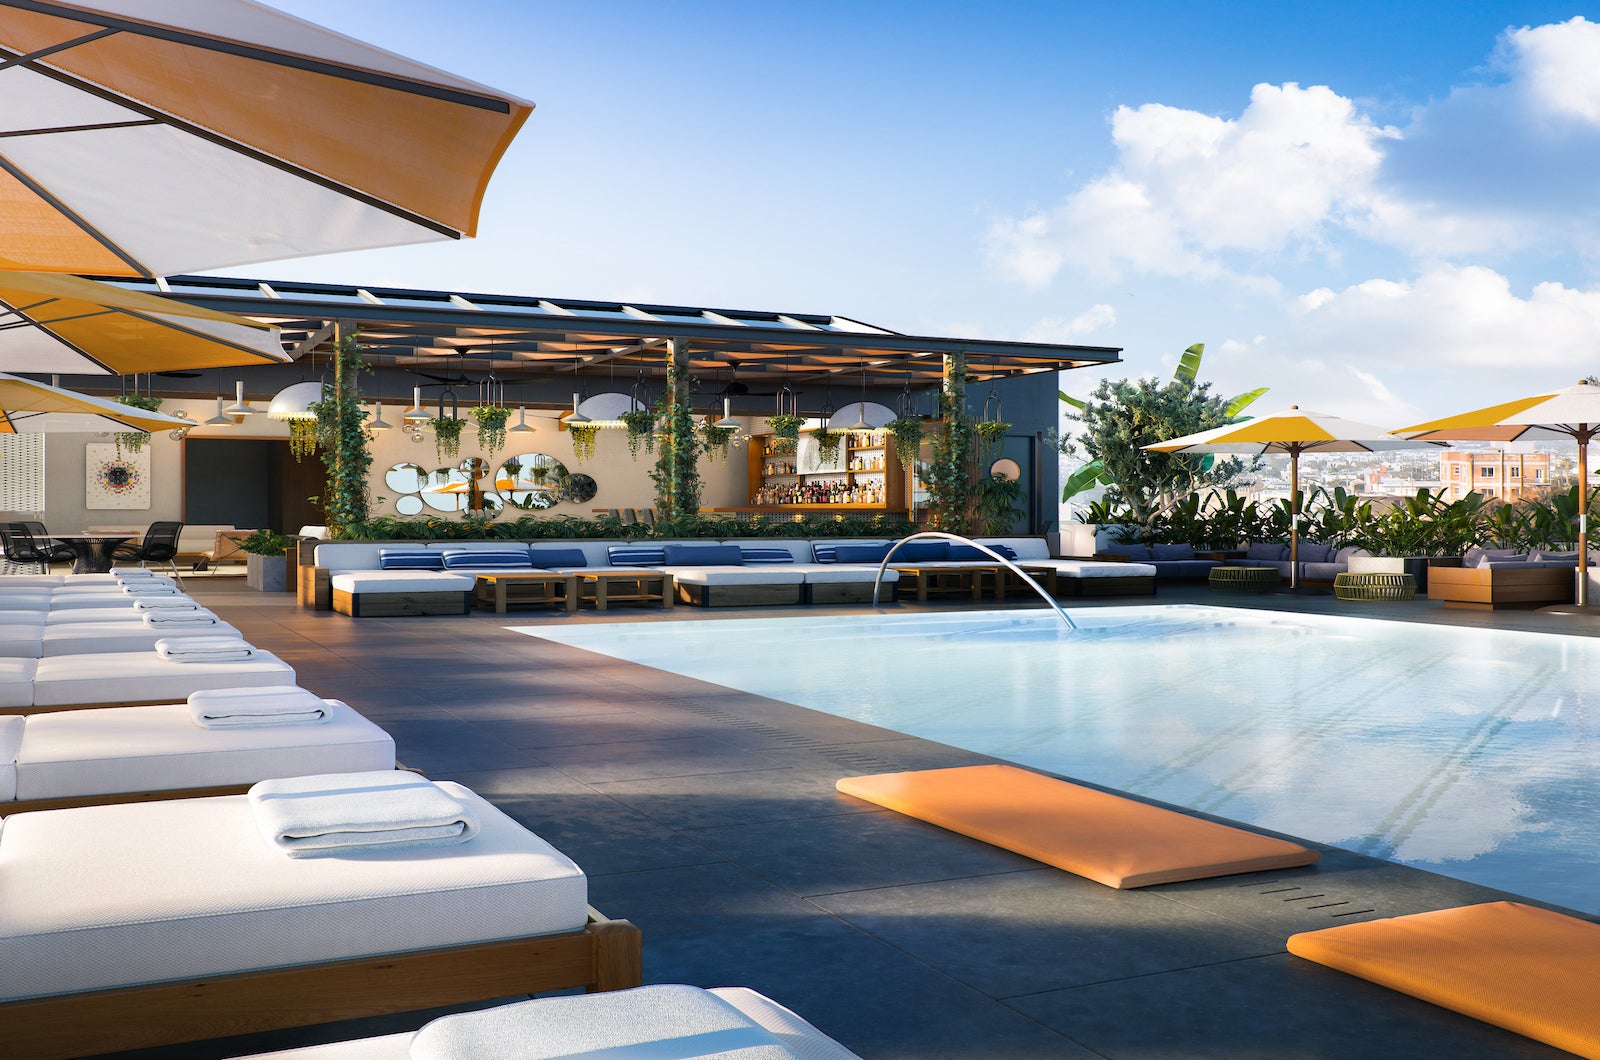 Rooftop pool and bar with lounge chairs and blue sky